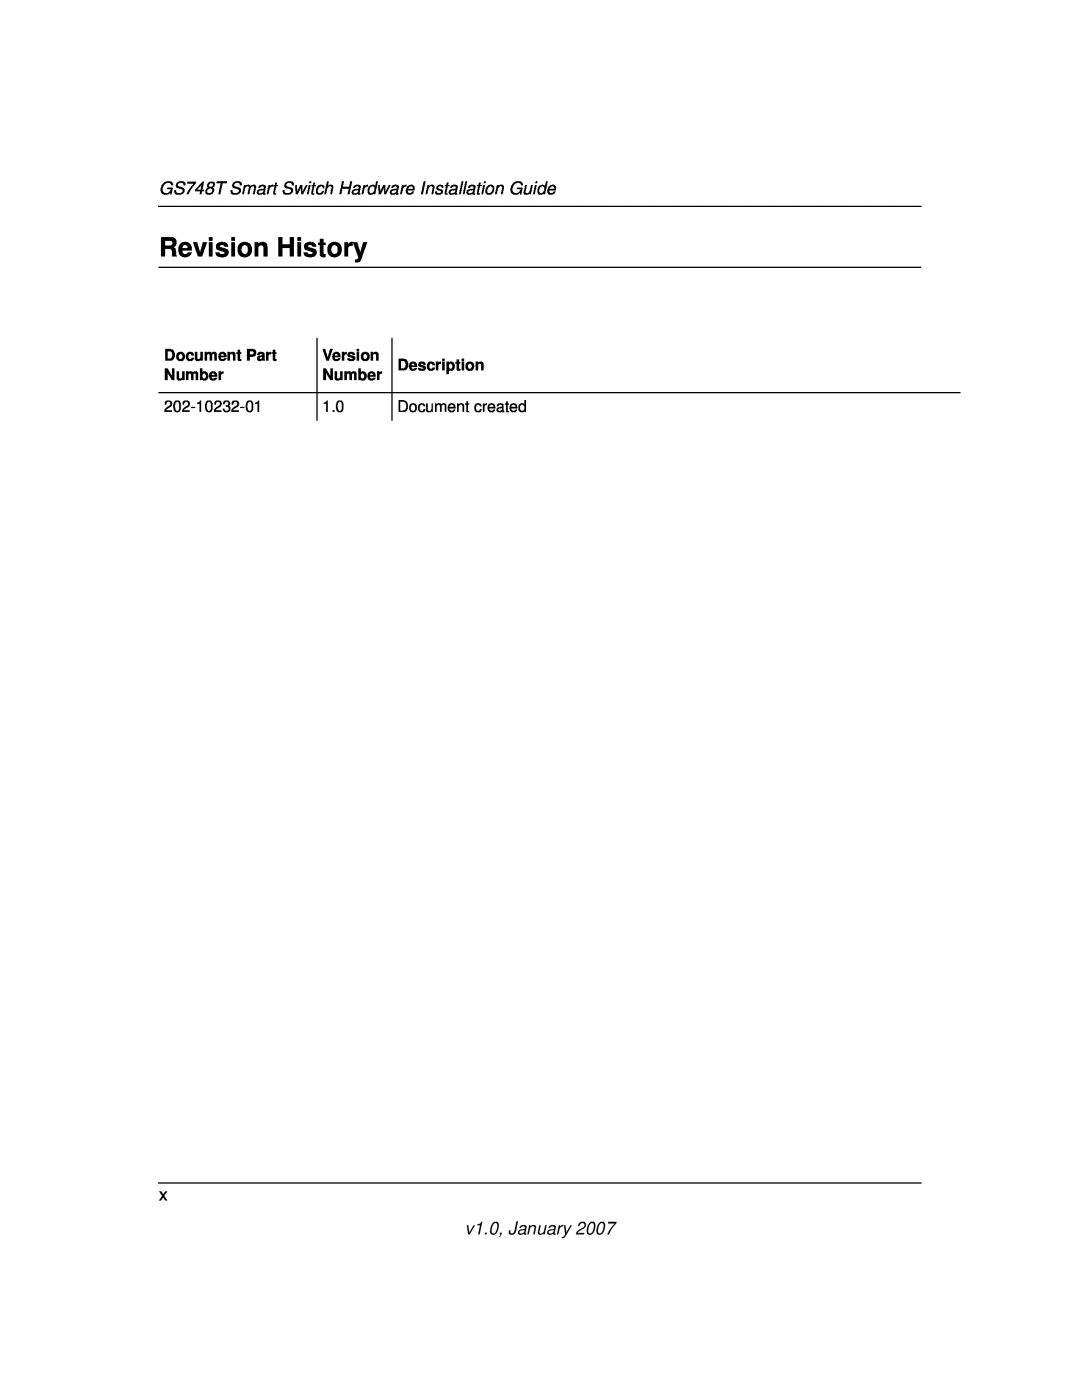 NETGEAR manual Revision History, GS748T Smart Switch Hardware Installation Guide, v1.0, January 